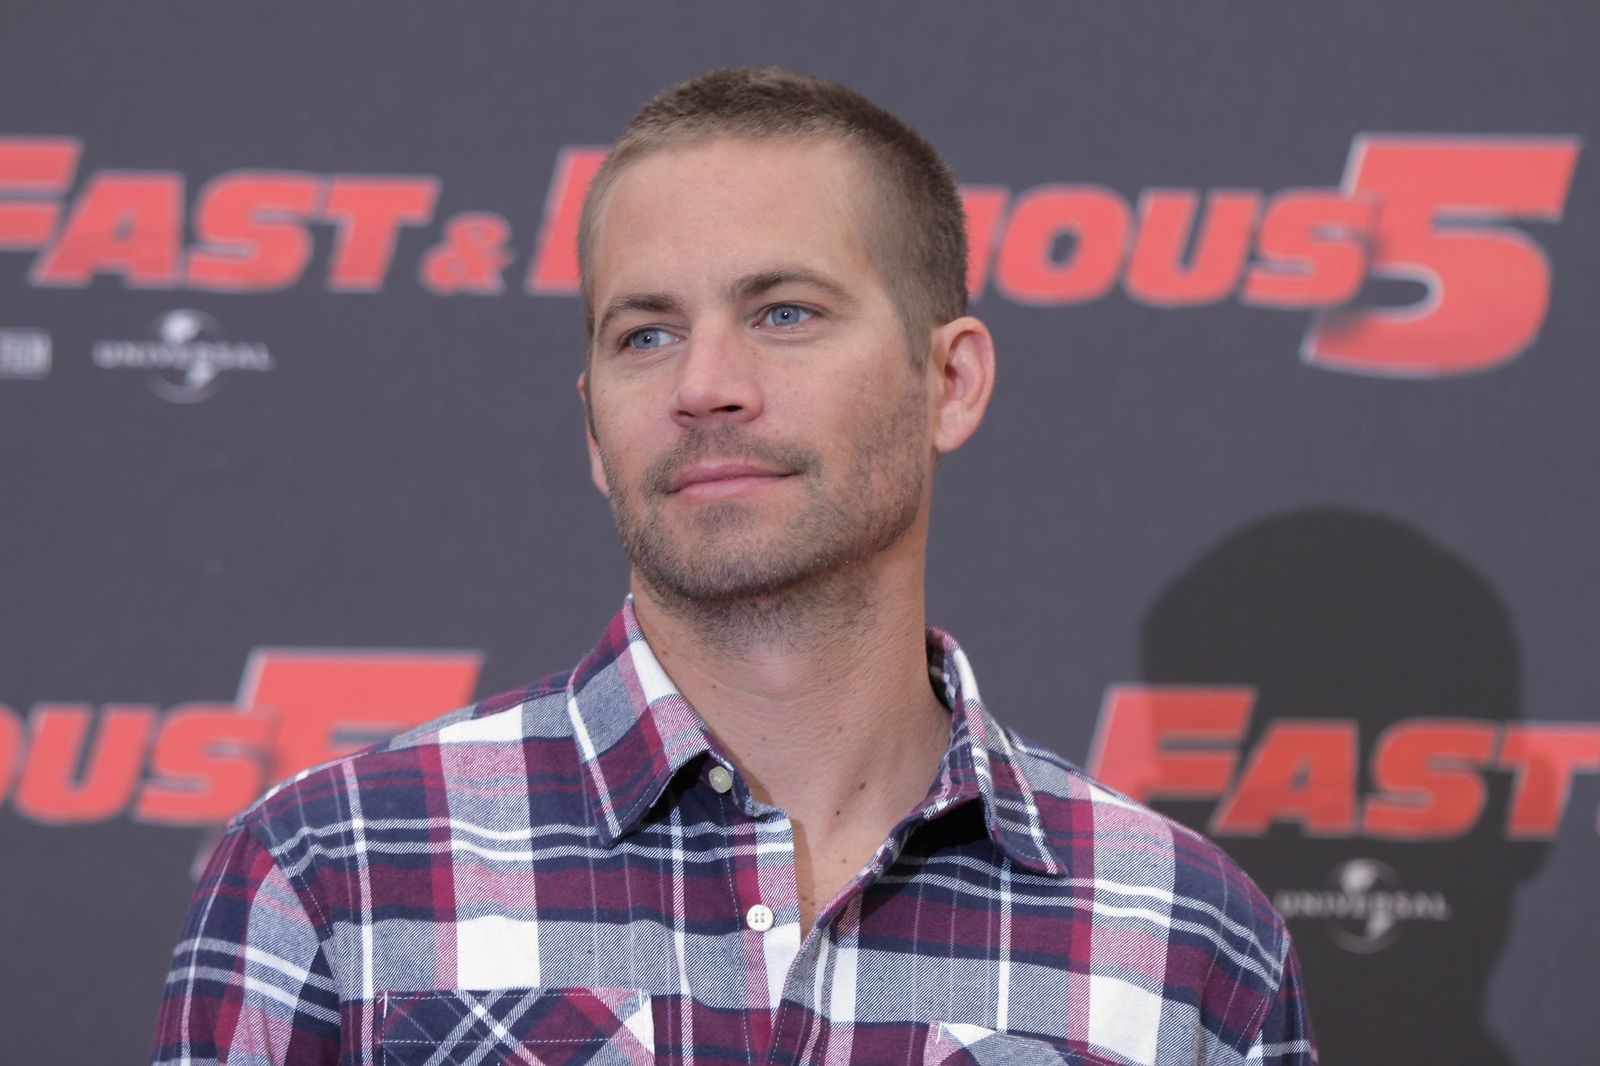 Paul Walker at the "Fast & Furious 5" photocall at Hassler hotel on April 29, 2011 | Photo: Getty Images